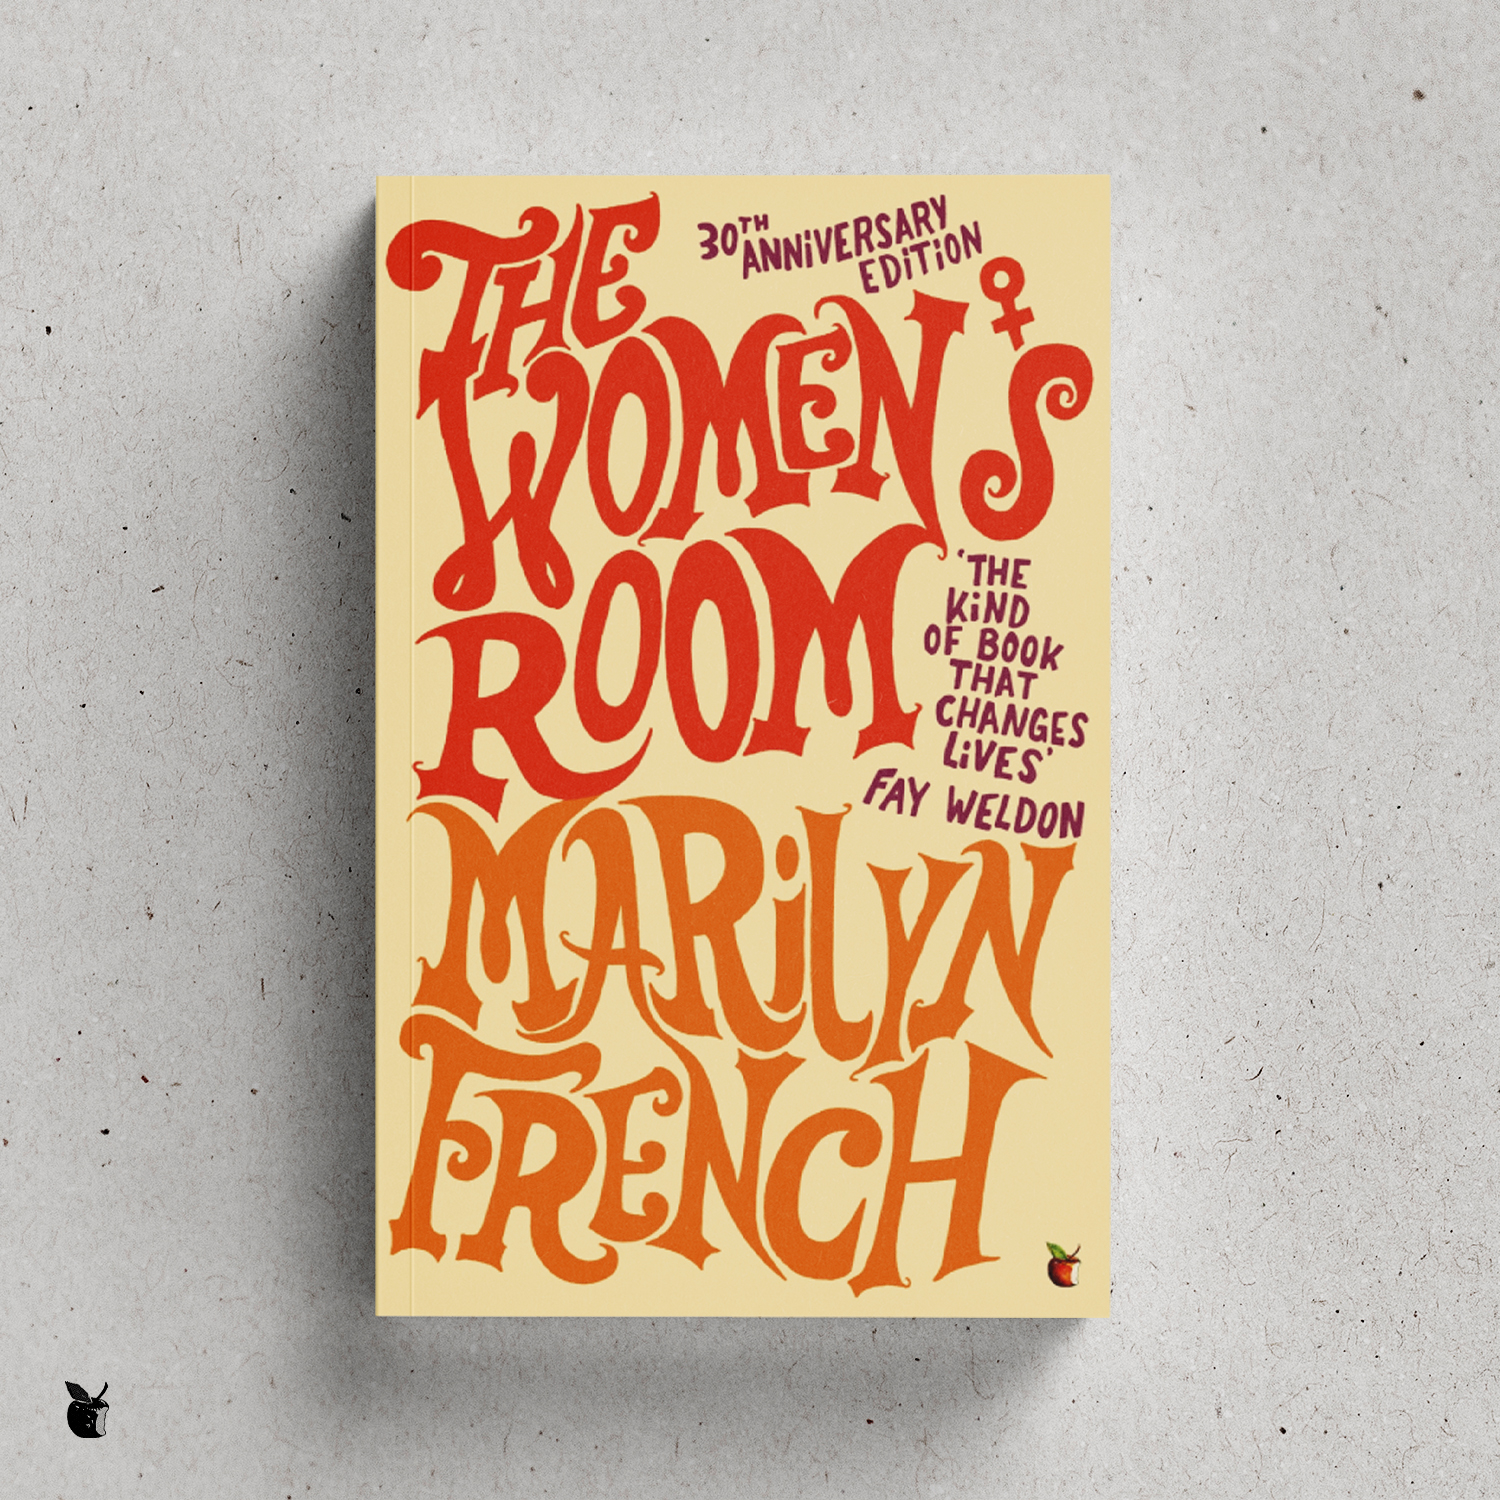 The Women's Room by Marilyn French